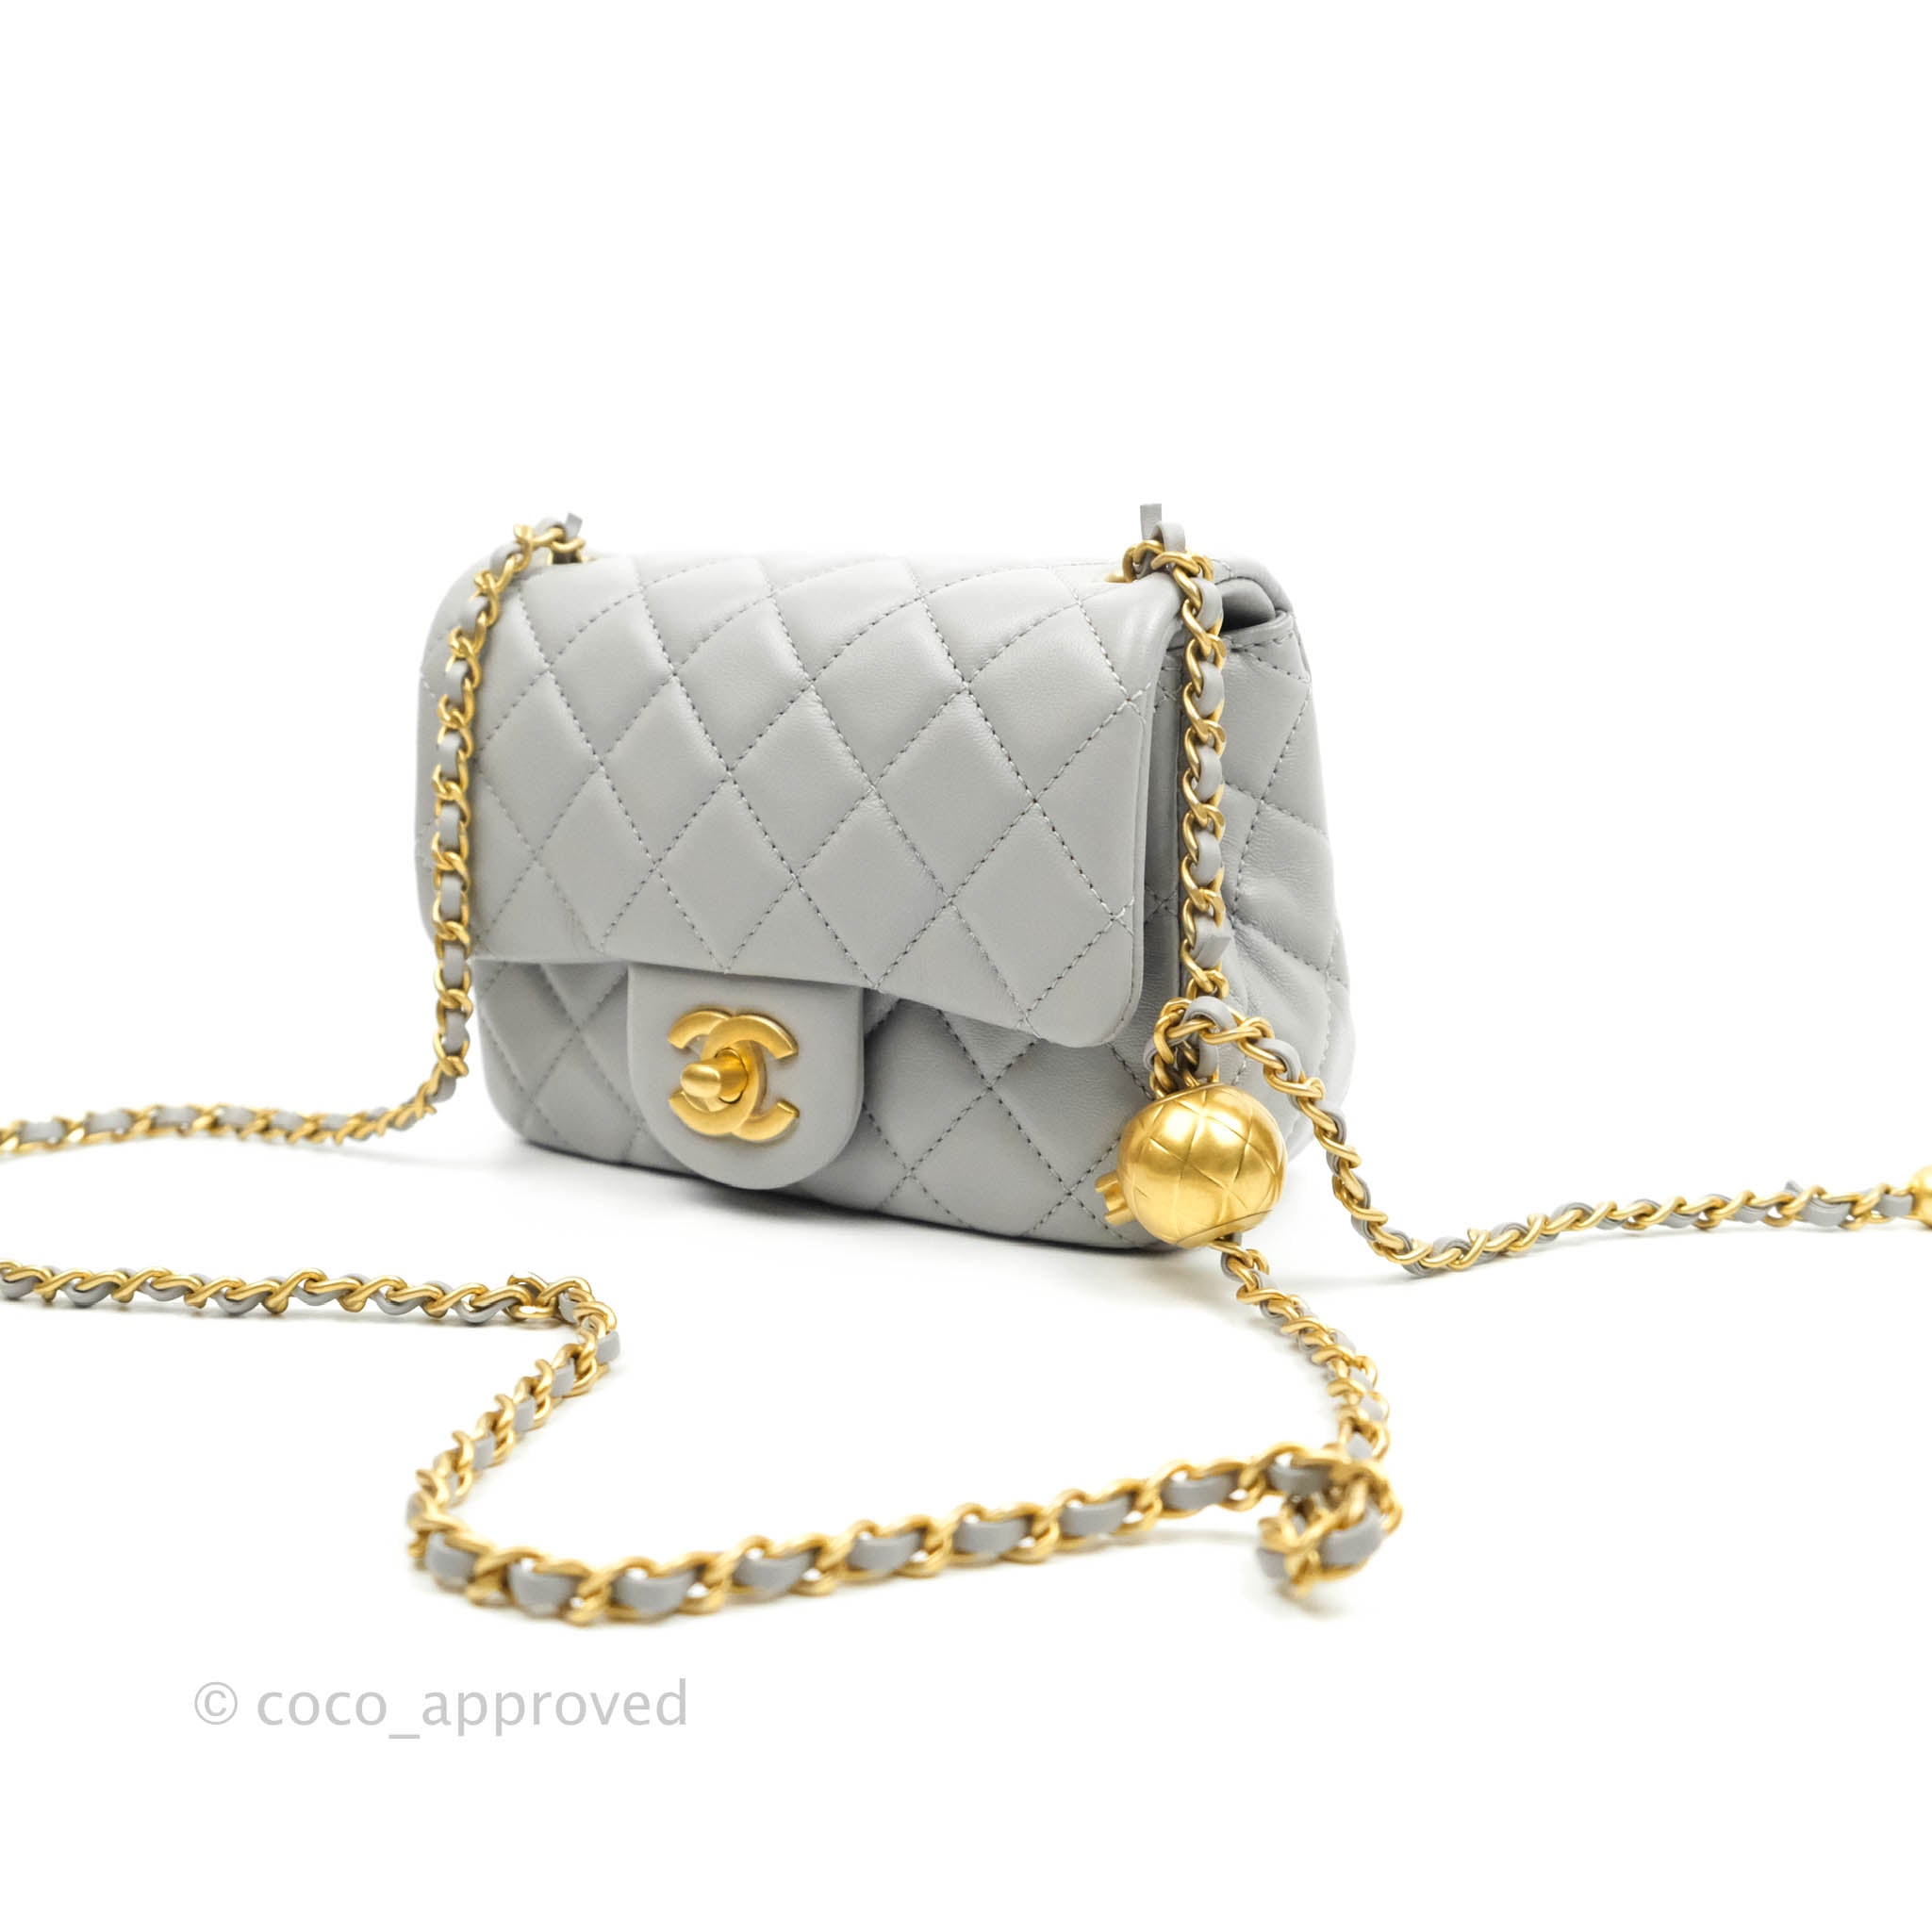 Chanel Pearl Crush Mini Square Quilted Grey Lambskin Aged Gold